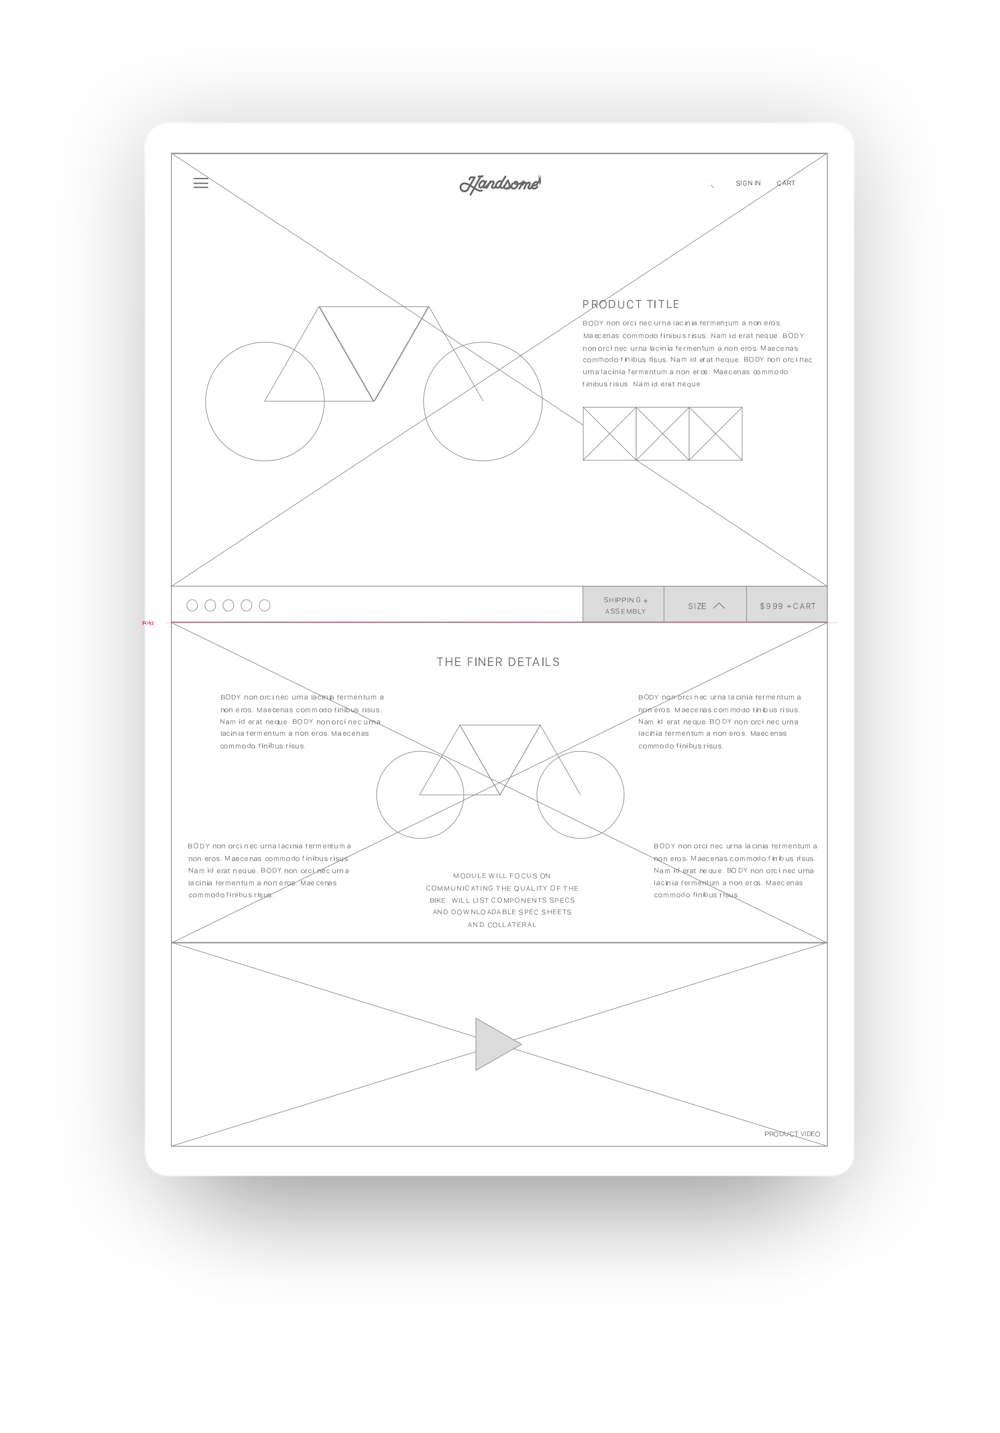 Handsome Cycles UX Design PDP